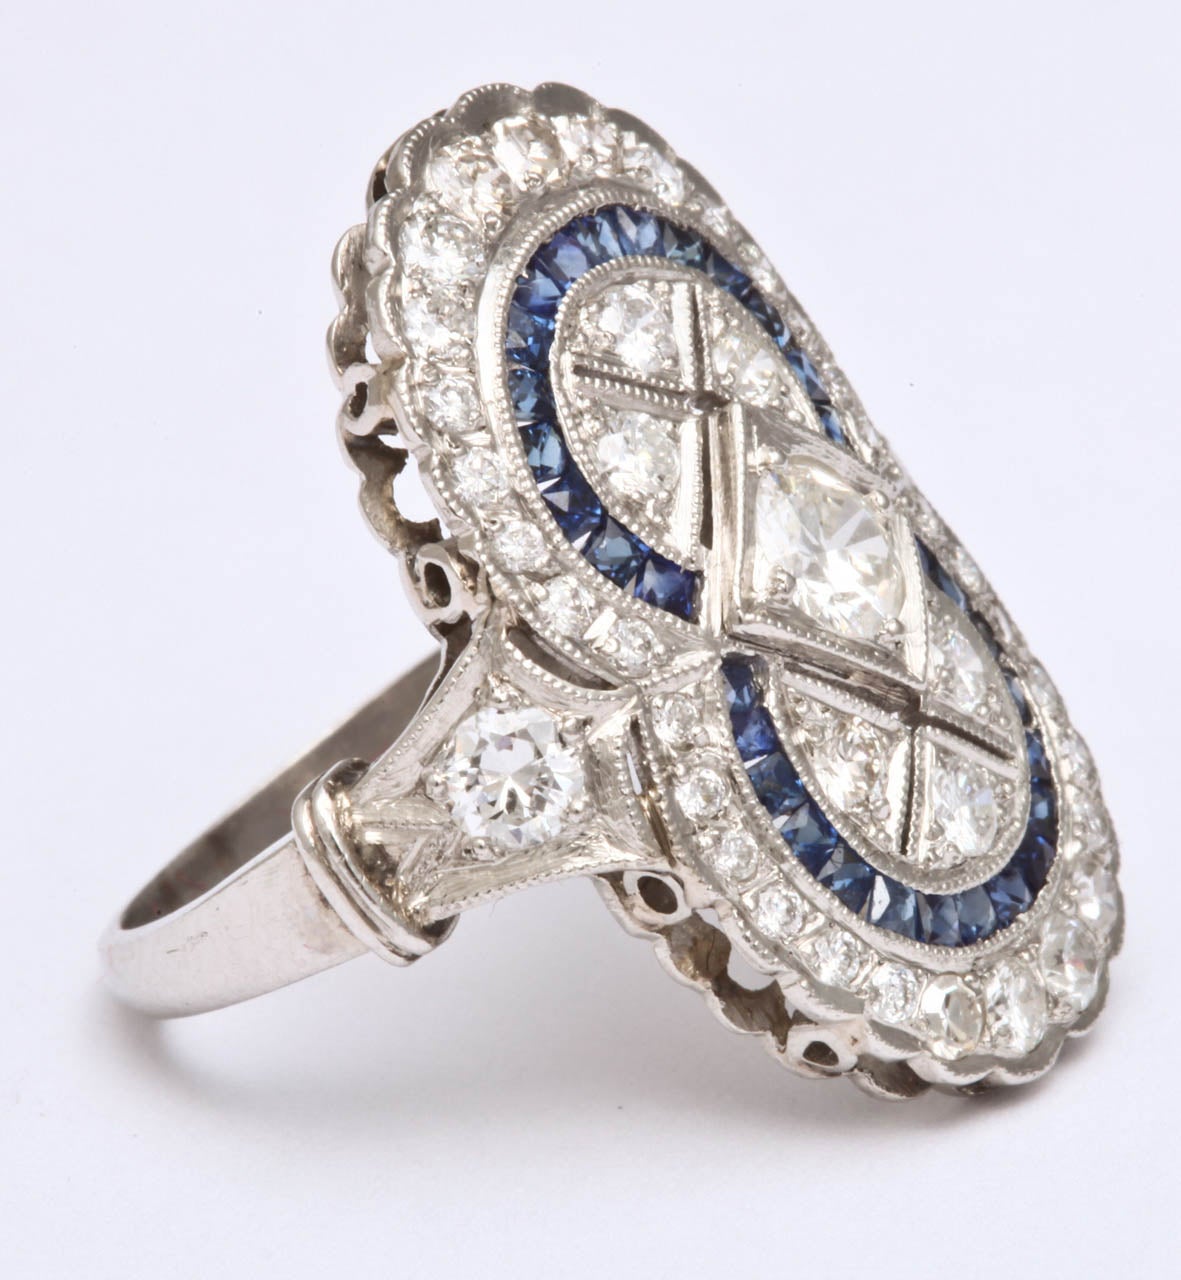 Platinum large cocktail dinner ring in the shape of a figure 8, embellished with numerous custom cut calibre cut sapphires and set with numerous old cut diamonds weighing approximately 1.50 cts; very high quality stones.